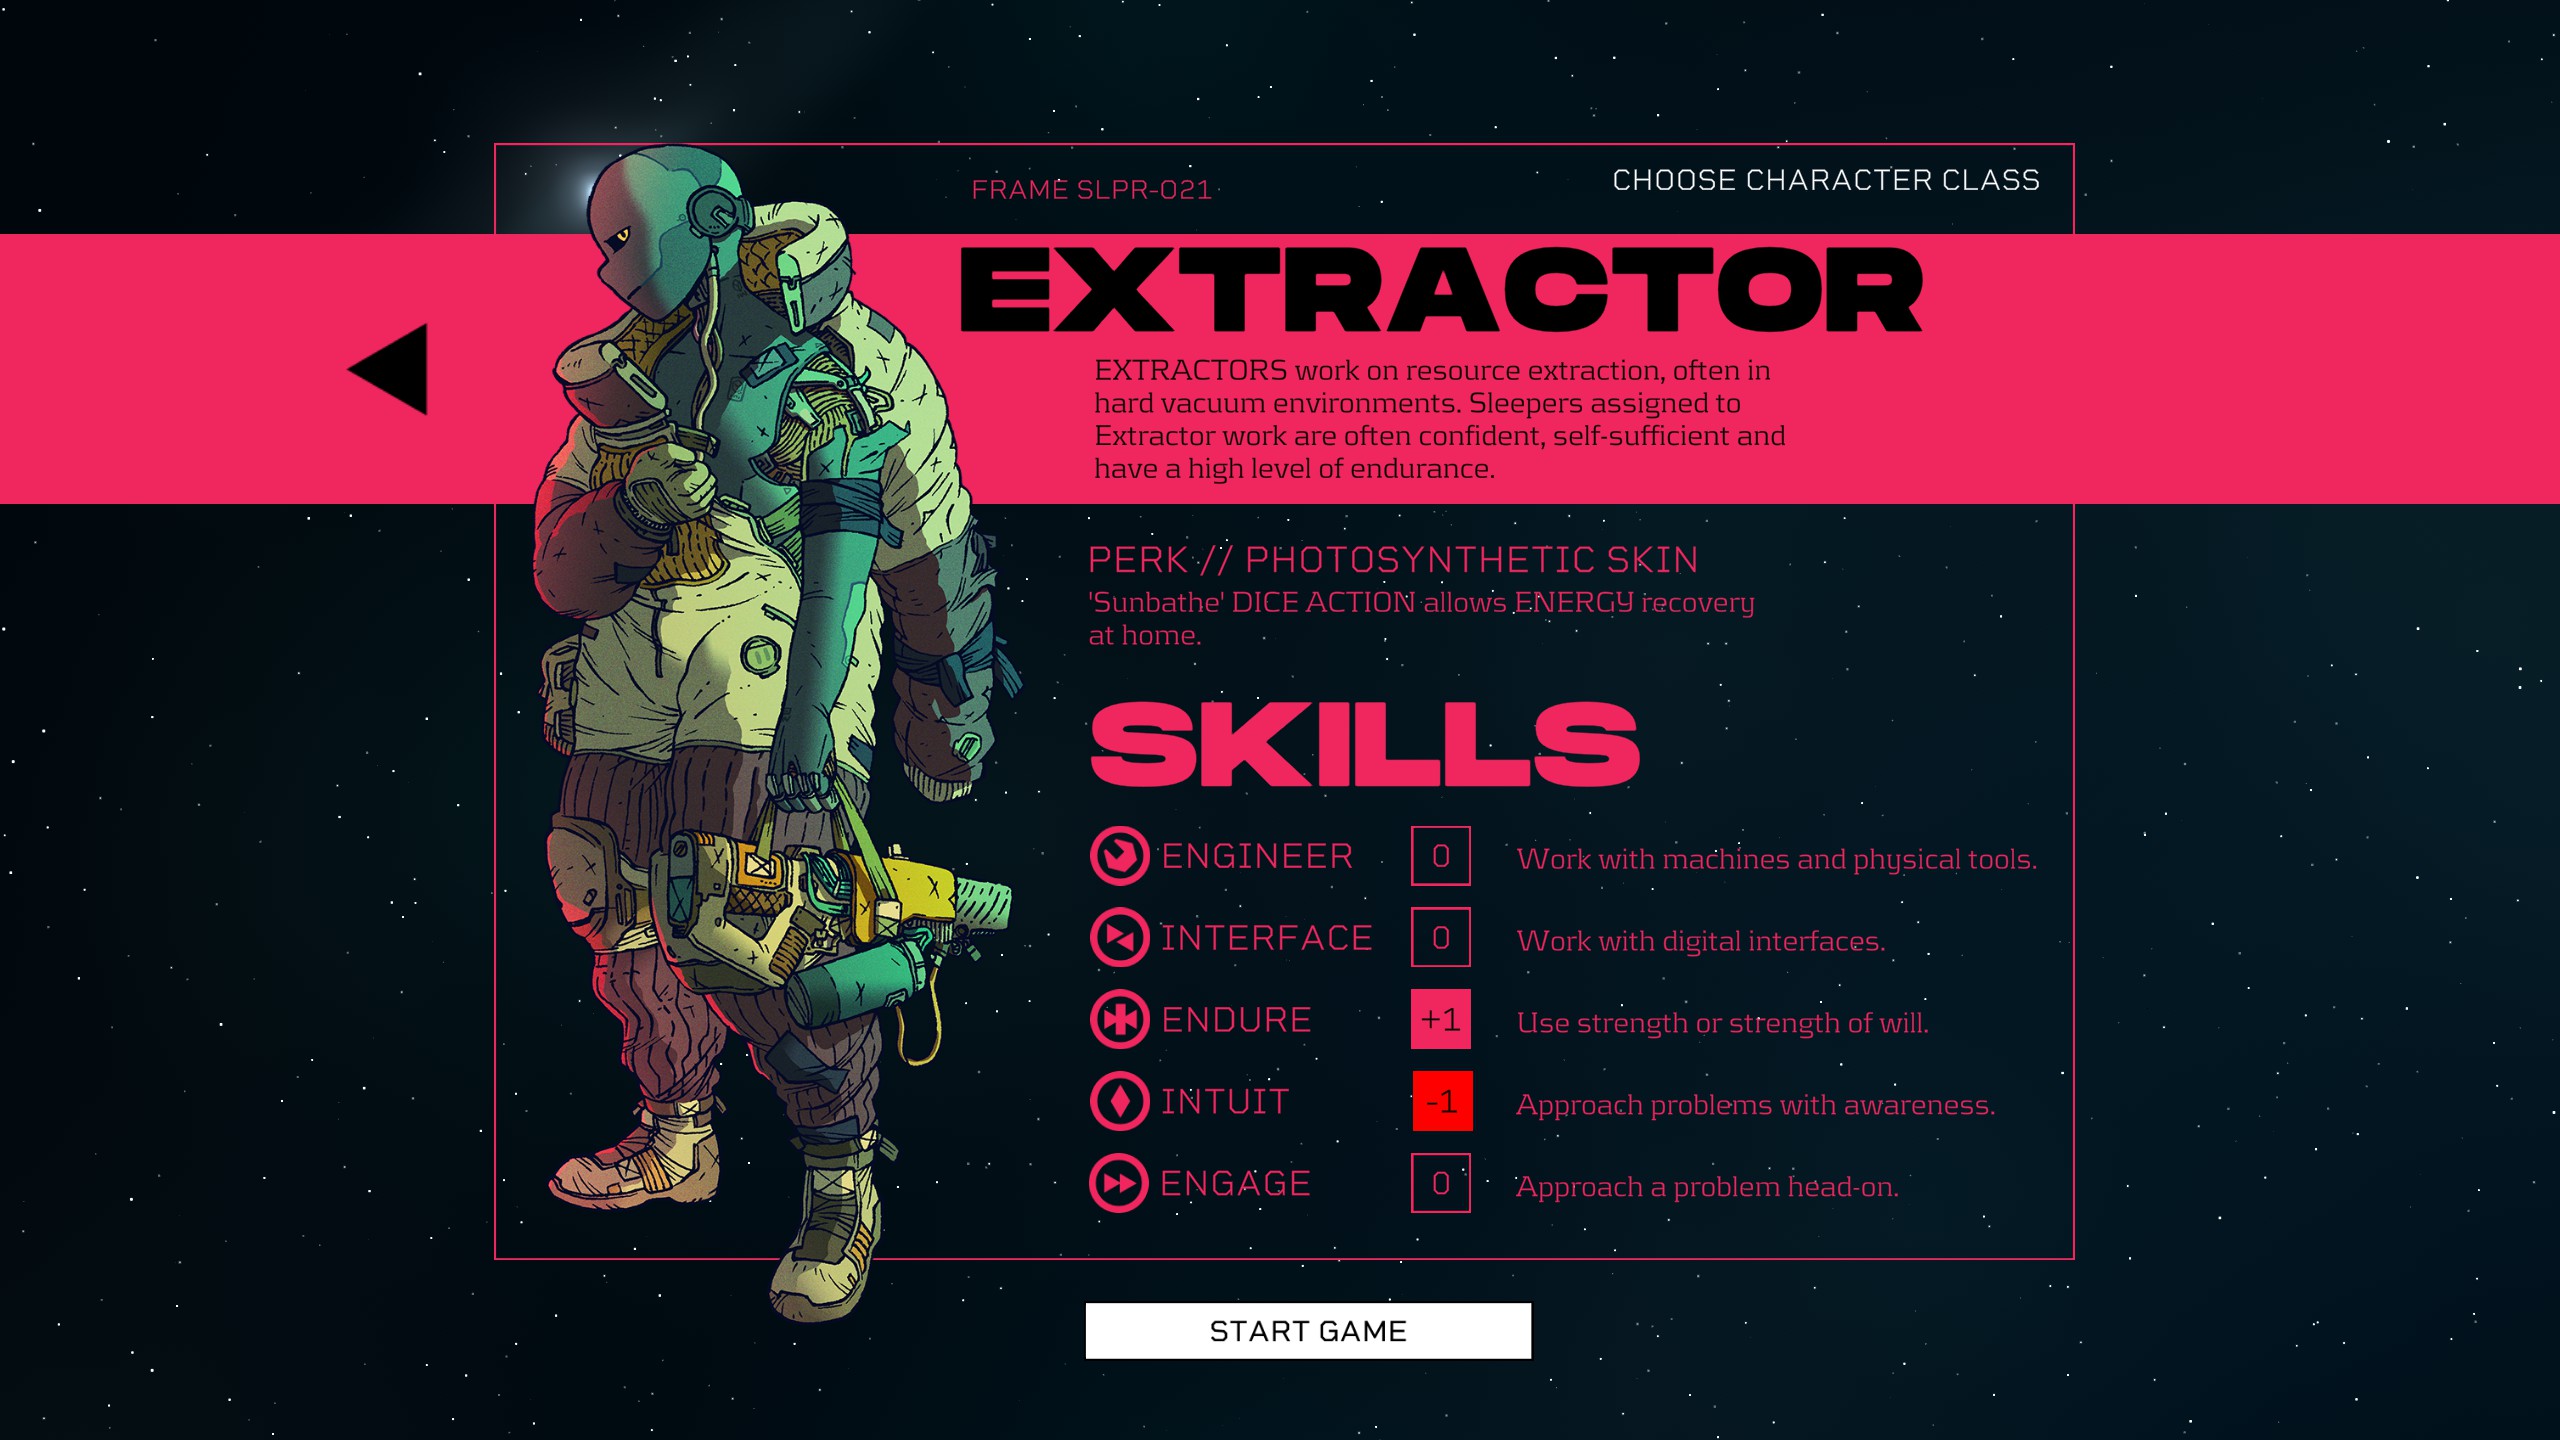 Character selection screen for Citizen Sleeper. The current class selected is the Extractor.